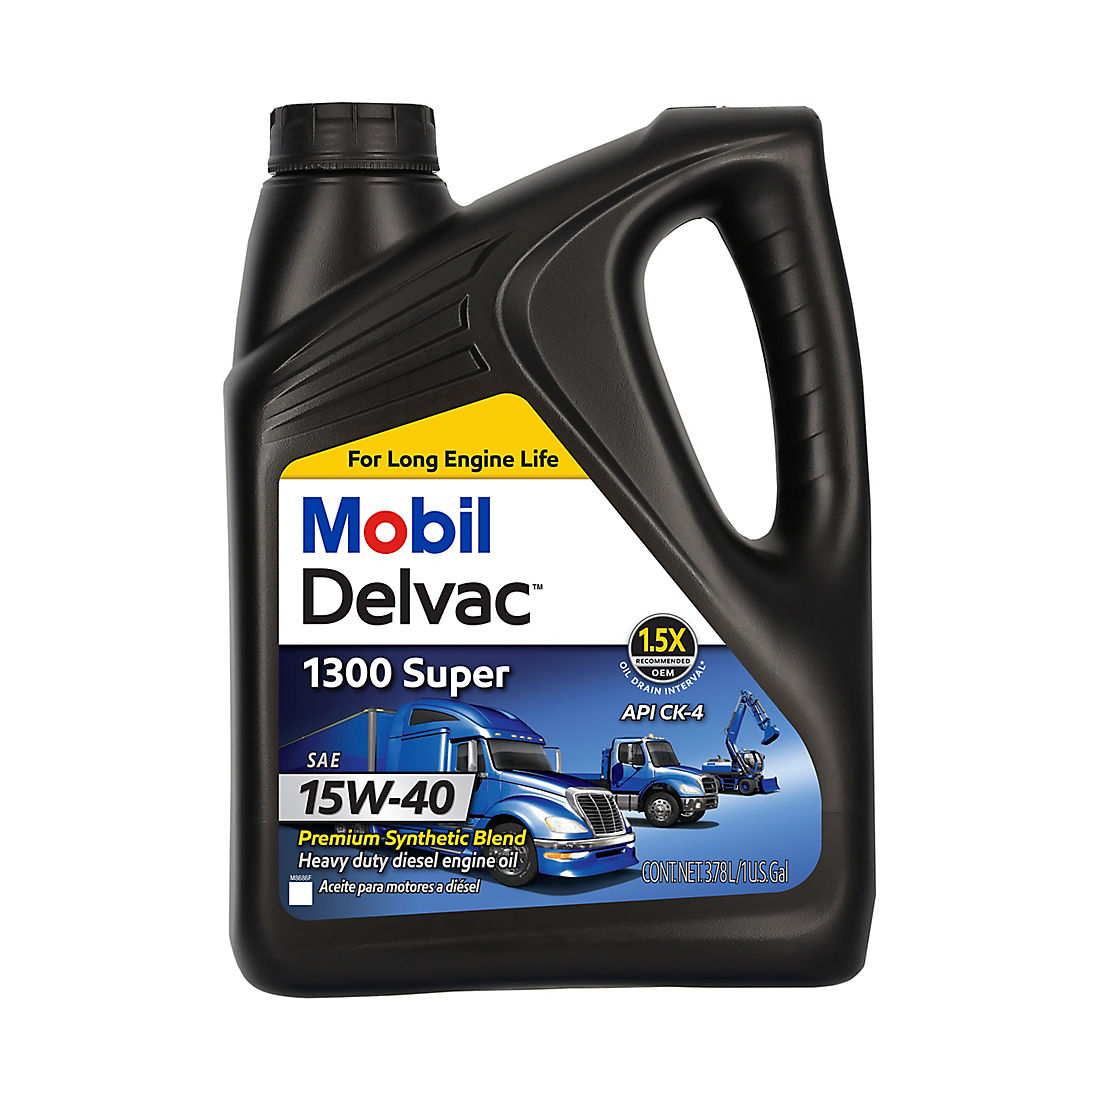 Сайт мобил масло. Mobil Delvac 10w 40 Diesel. Mobil 10w 40 Synthetic engine Oil. Мобил Делвак 10w 50. Oil Motor SAE 15w40.